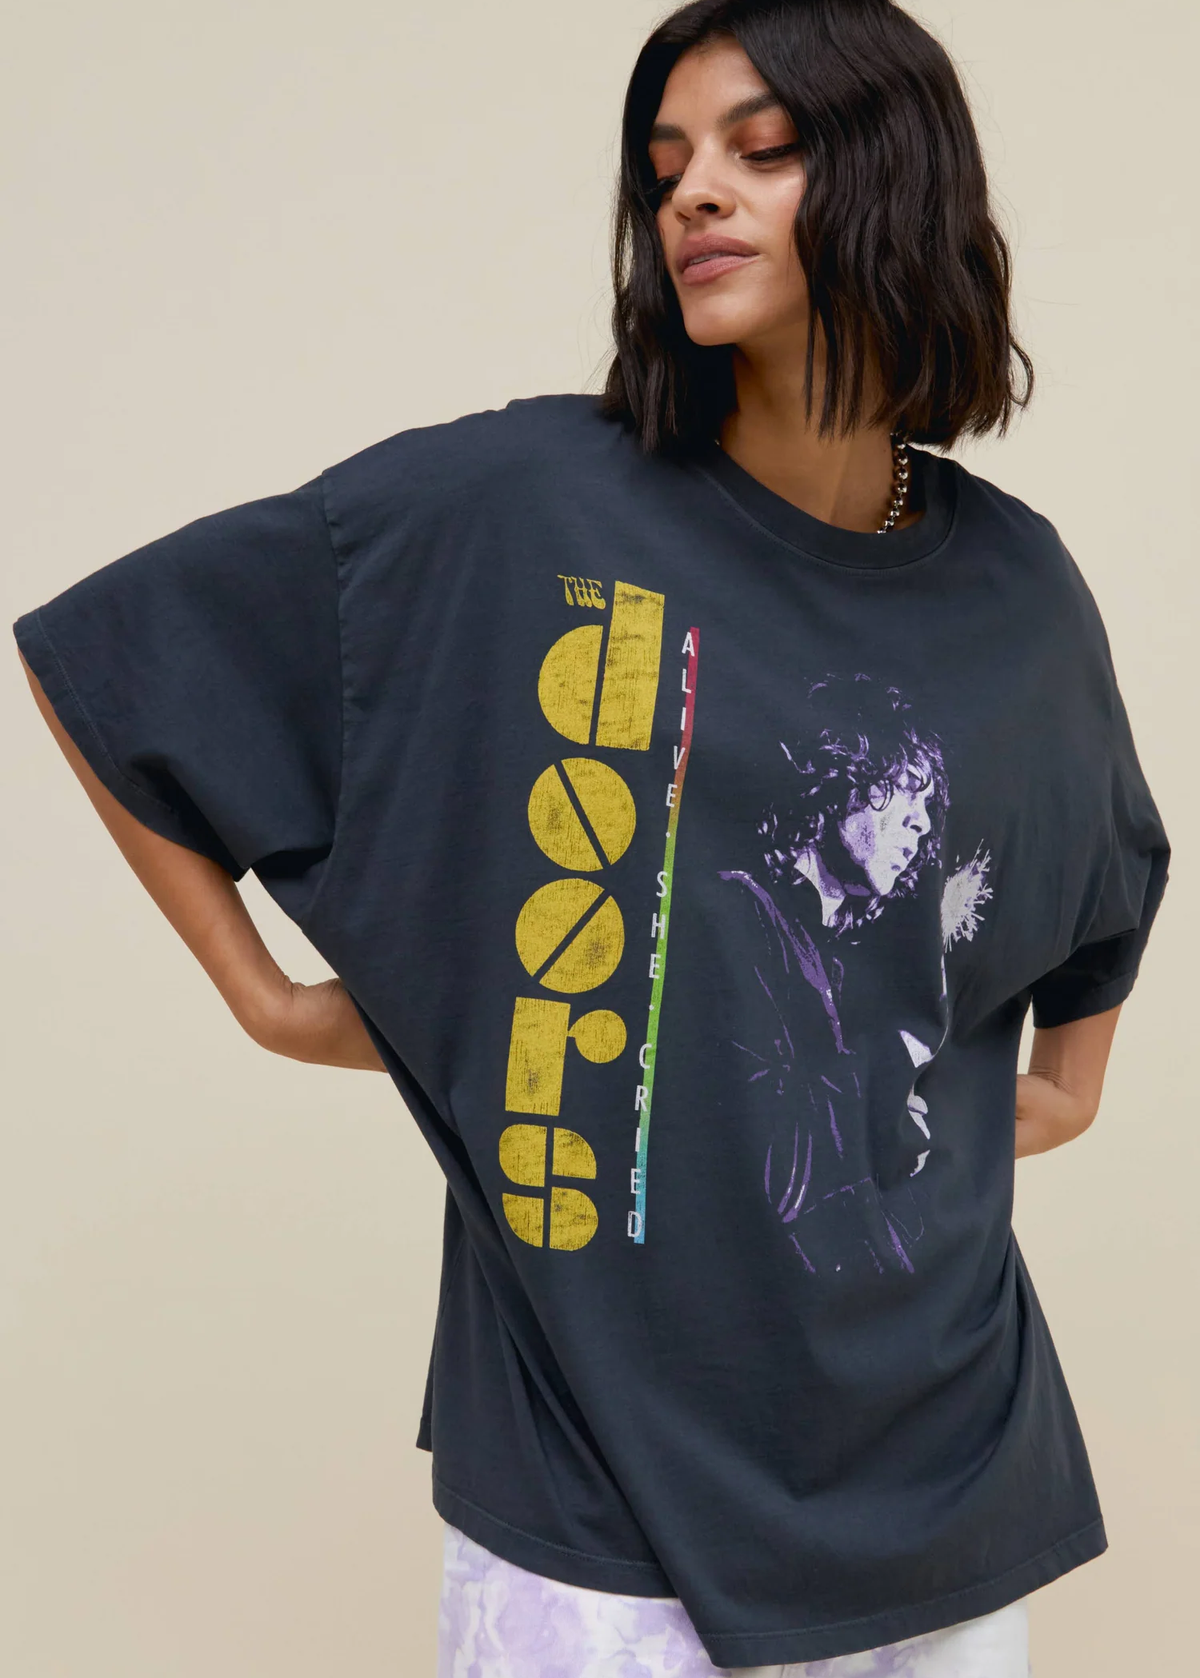 Daydreamer LA The Doors Jim Morrison Alive She Cried One Size Oversized Tee. Made in California and officially licensed